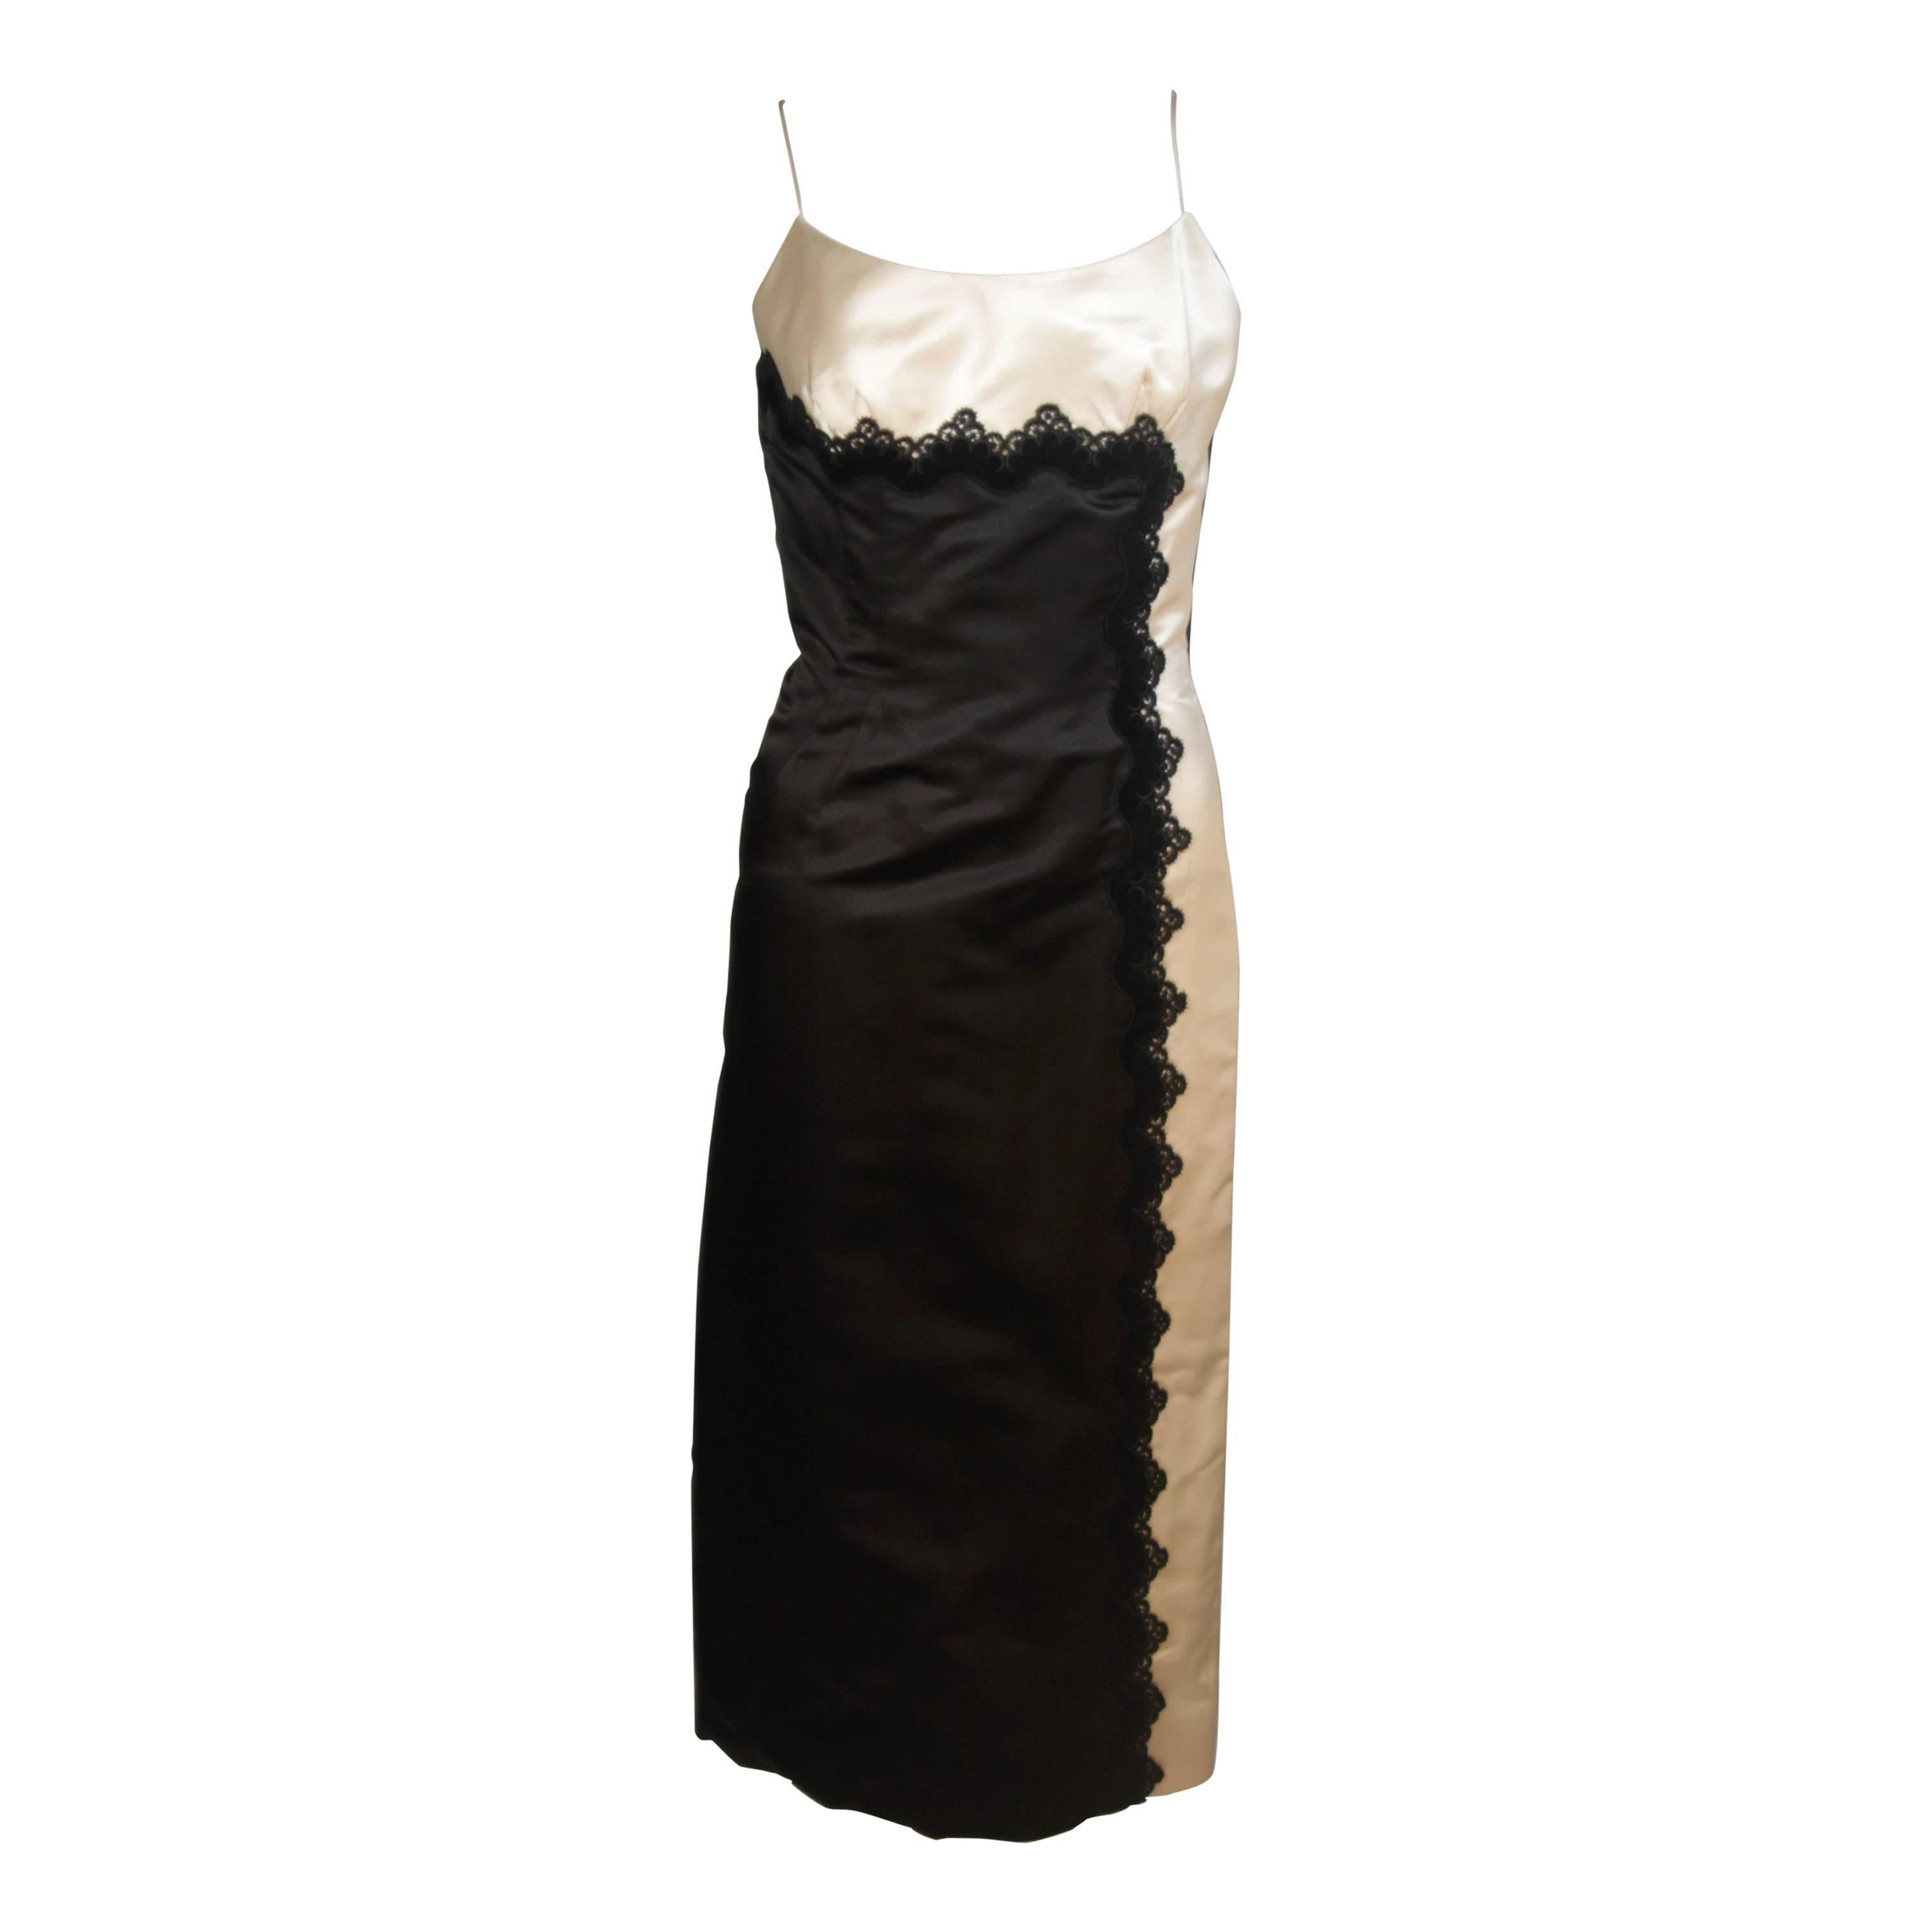 OLEG CASSINI Black and White Contrast Cocktail Dress with Lace Size 2-4 For Sale